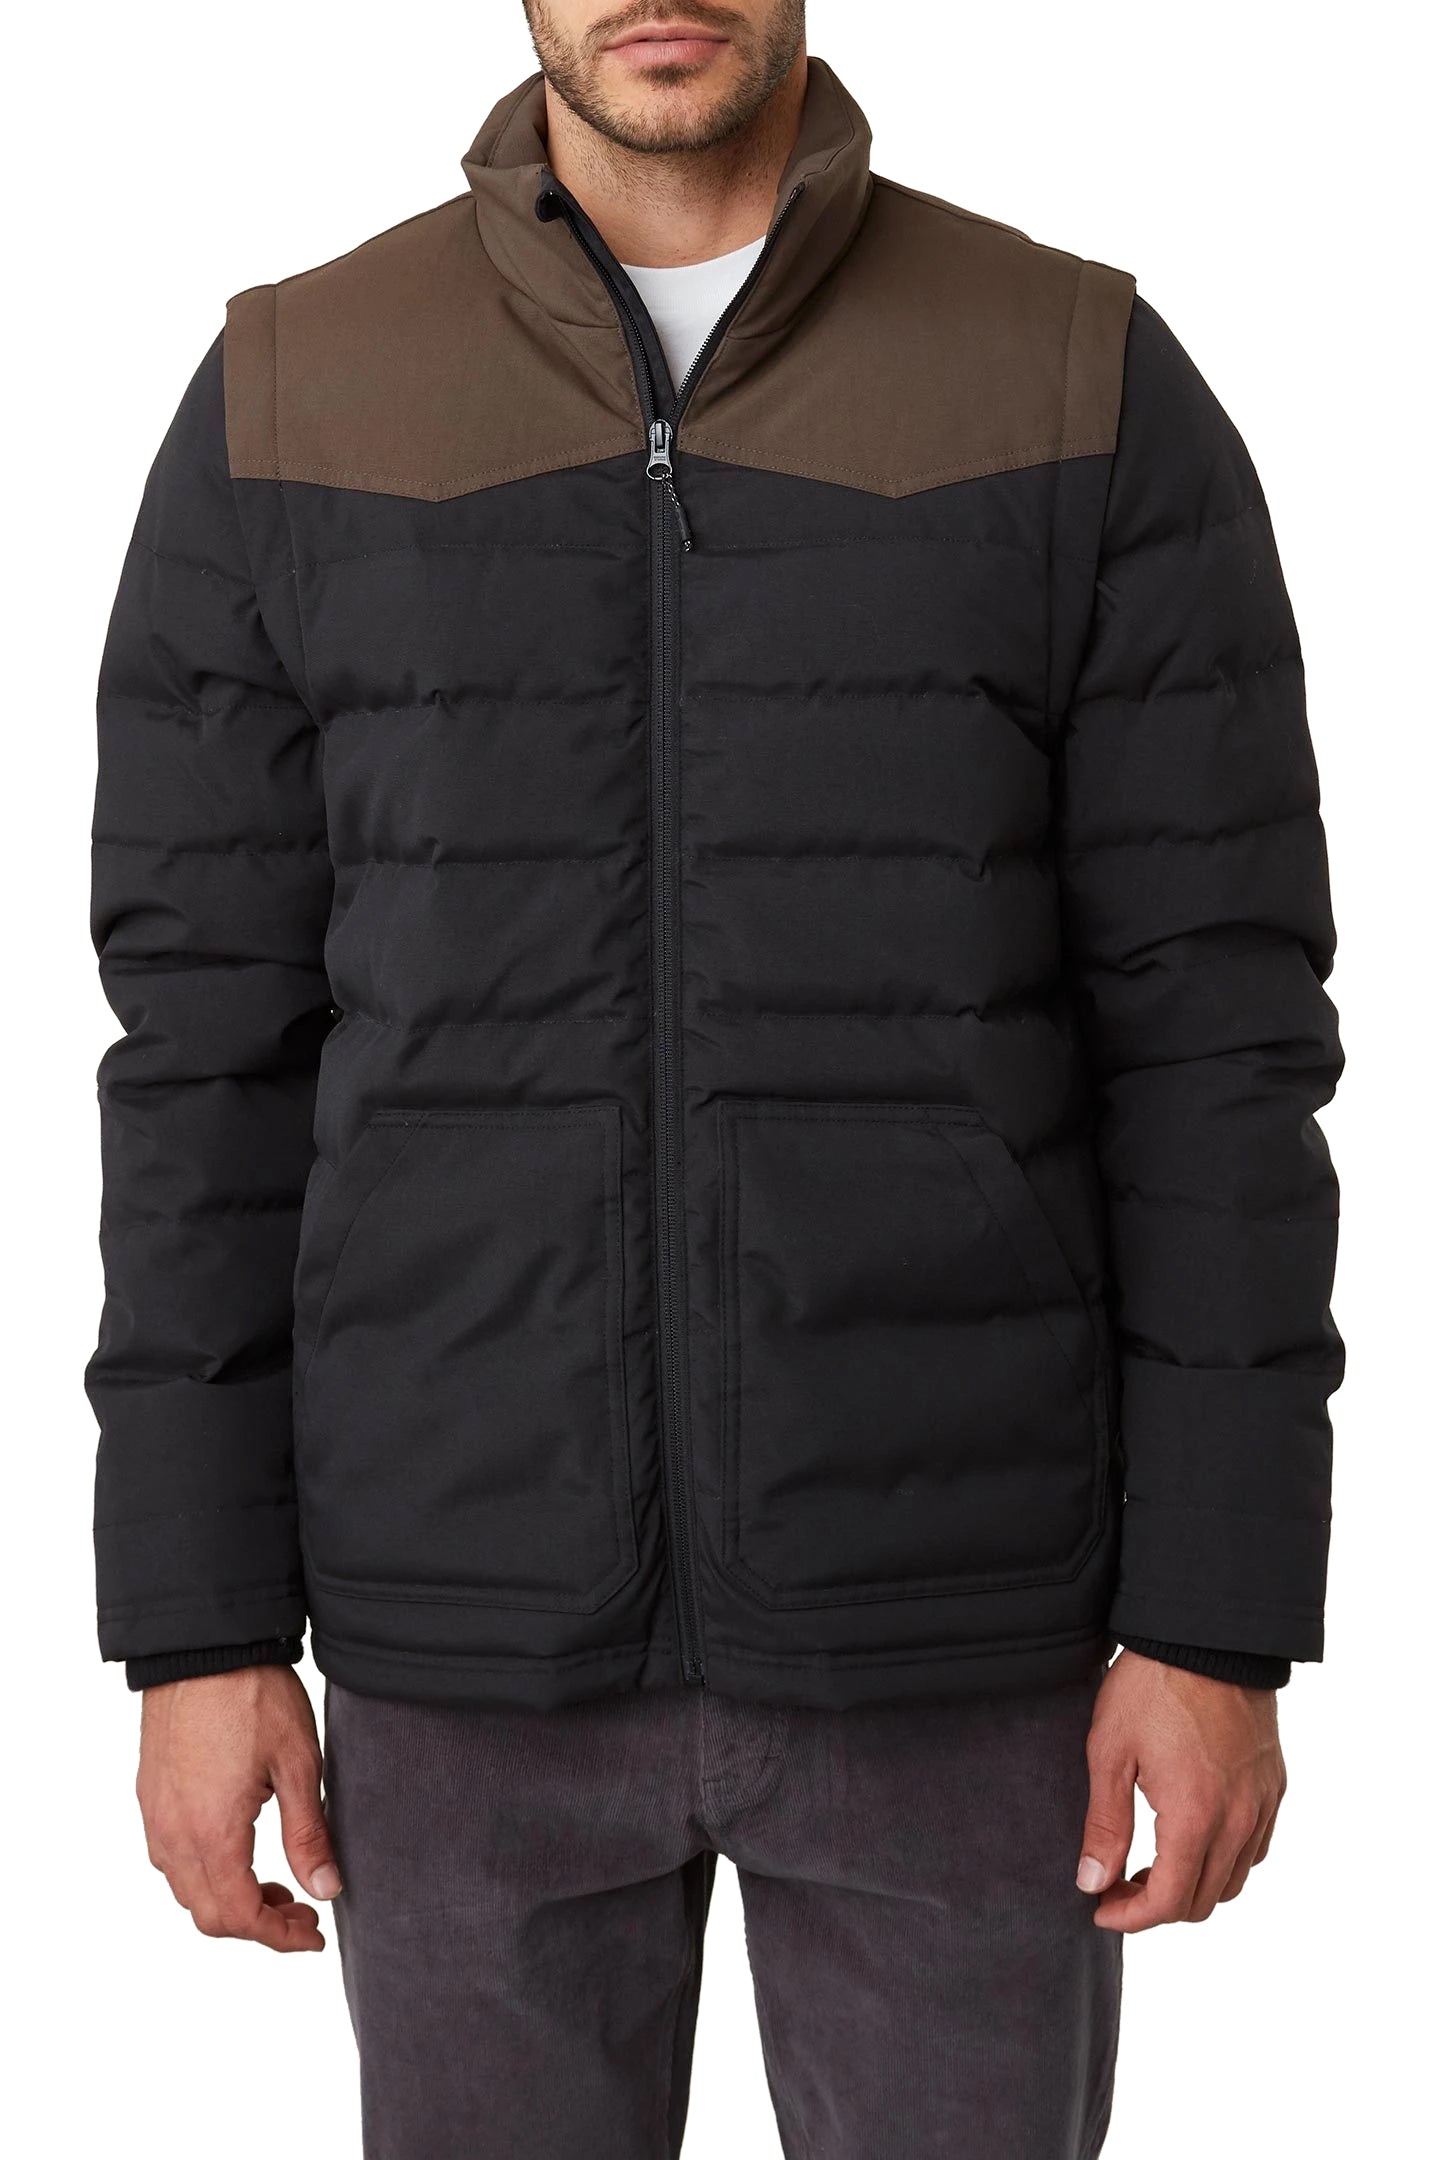 O'neill Sierra Quilted Jacket COC-Cocoa L